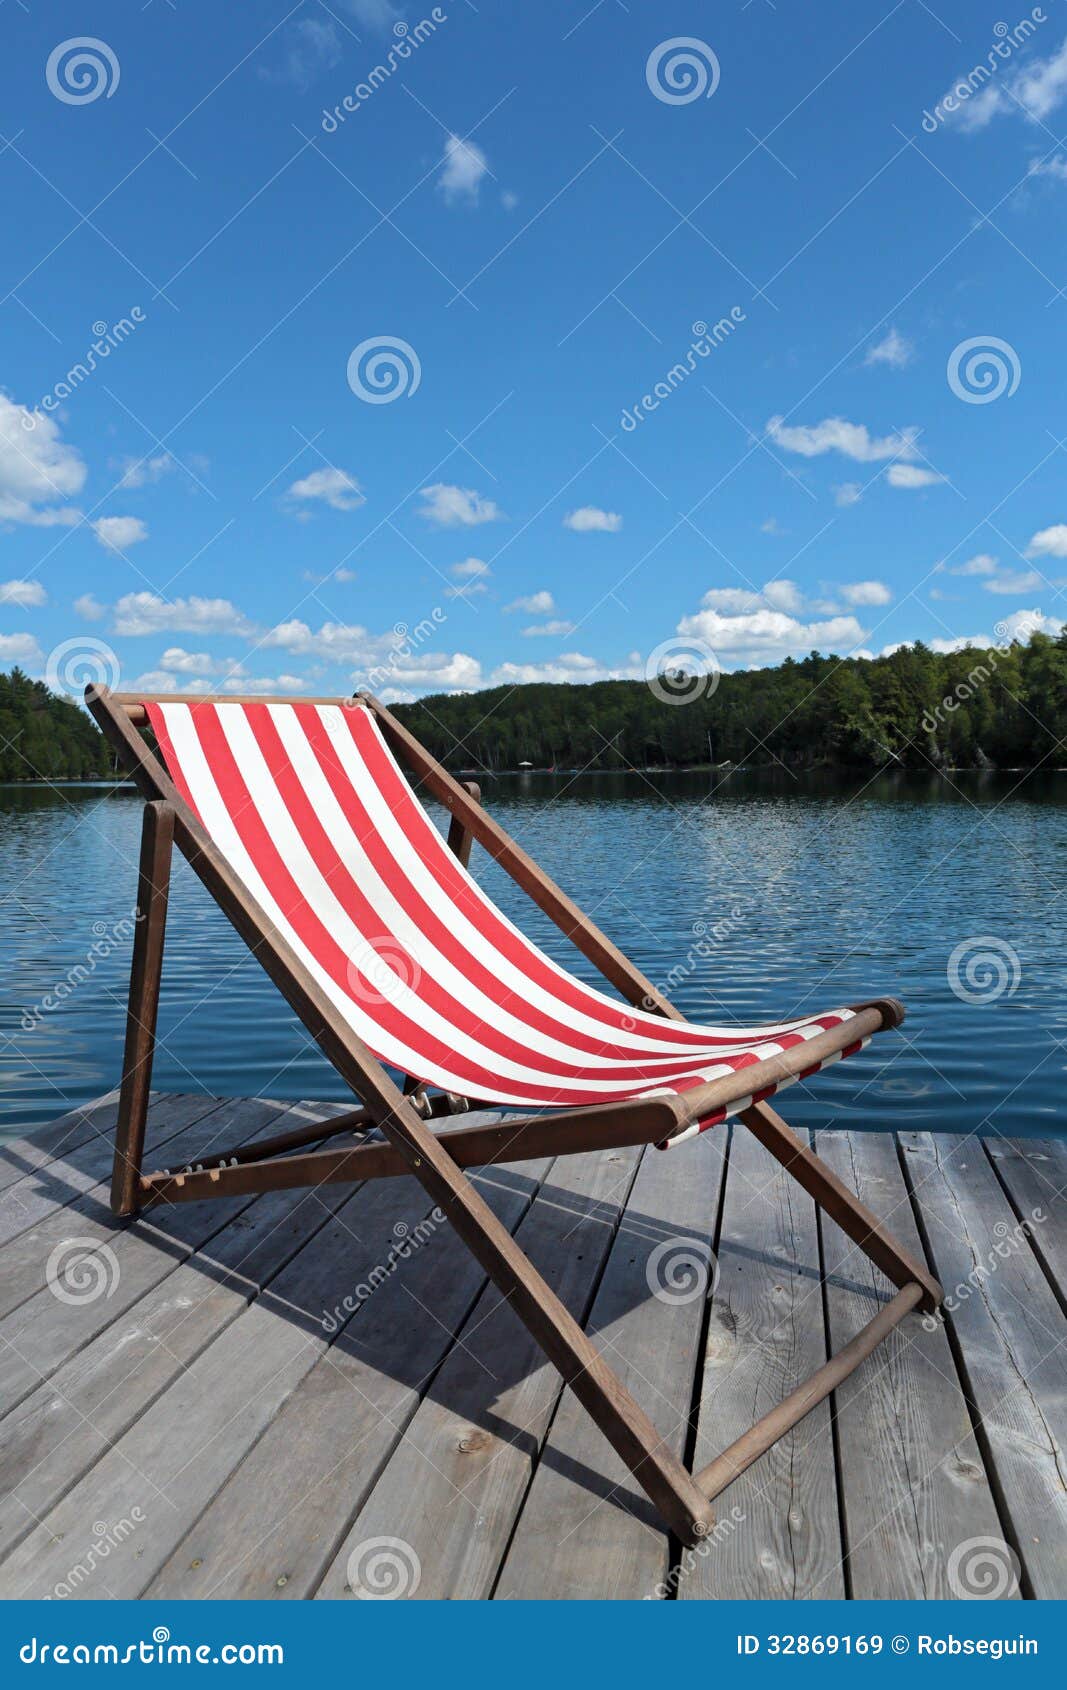 chair on the dock